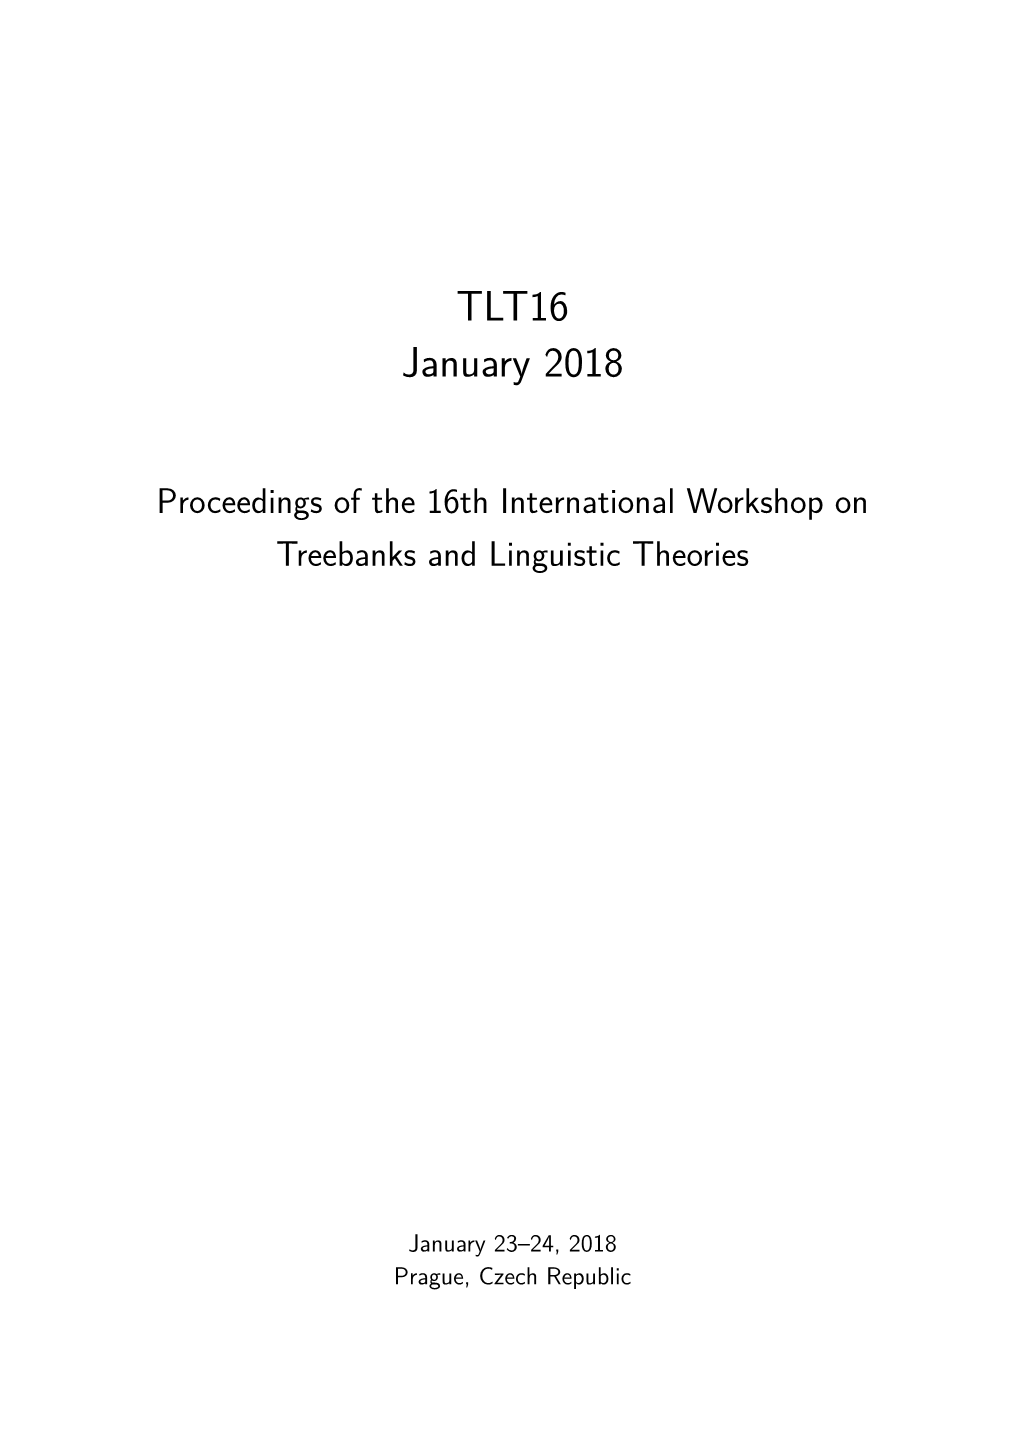 Proceedings of the 16Th International Workshop on Treebanks and Linguistic Theories